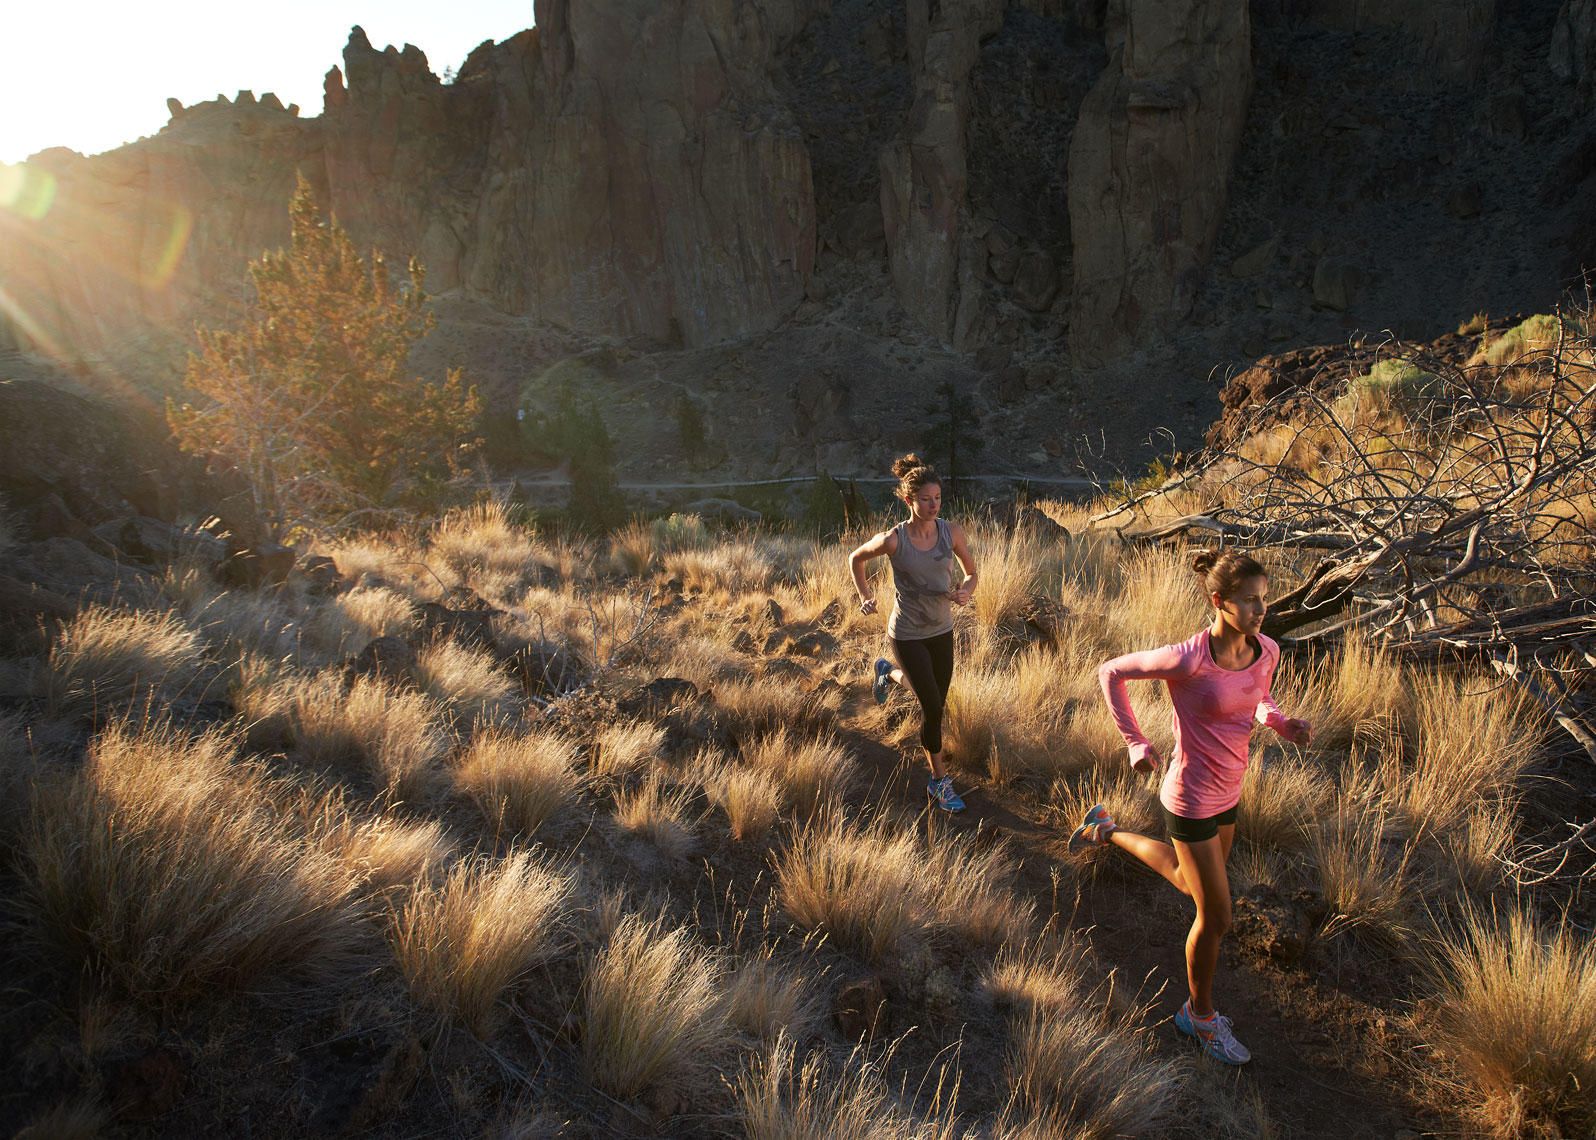 Runners captured near Smith Rock in Bend Oregon for a photoshoot